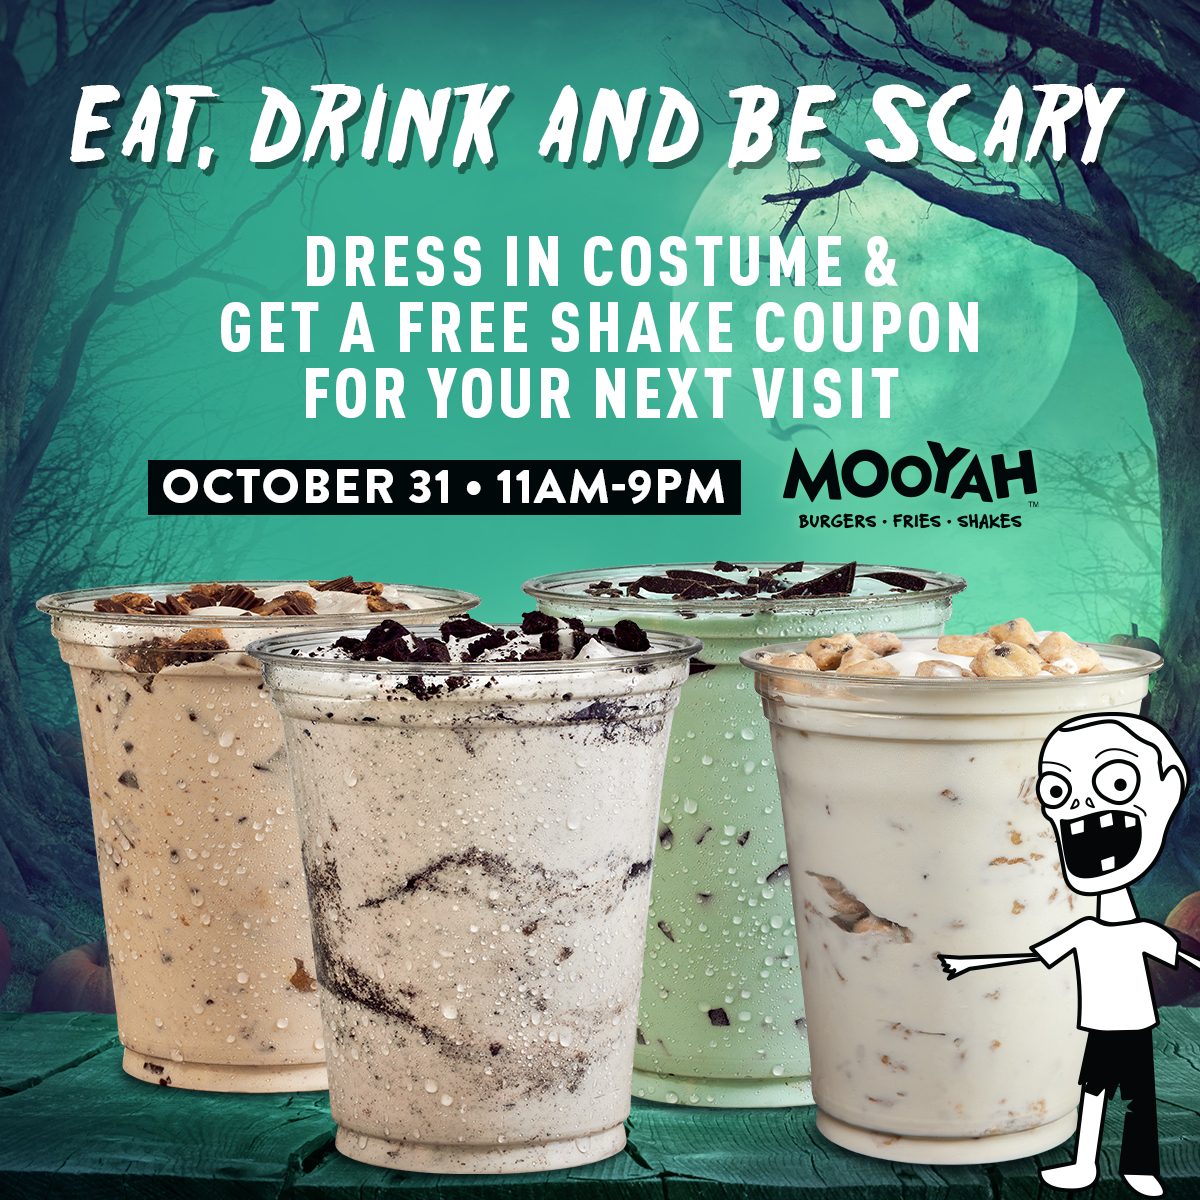 Happy  Halloween! Bring the kids (big and small) in costume for lunch or dinner and @MOOYAHBurgers Newington CT has a treat for you. @NewingtonPS @NewingtonCTgov @CCSU @NewBritainHigh @MagnetTrinity @lrwlibrary @NCTVNewington